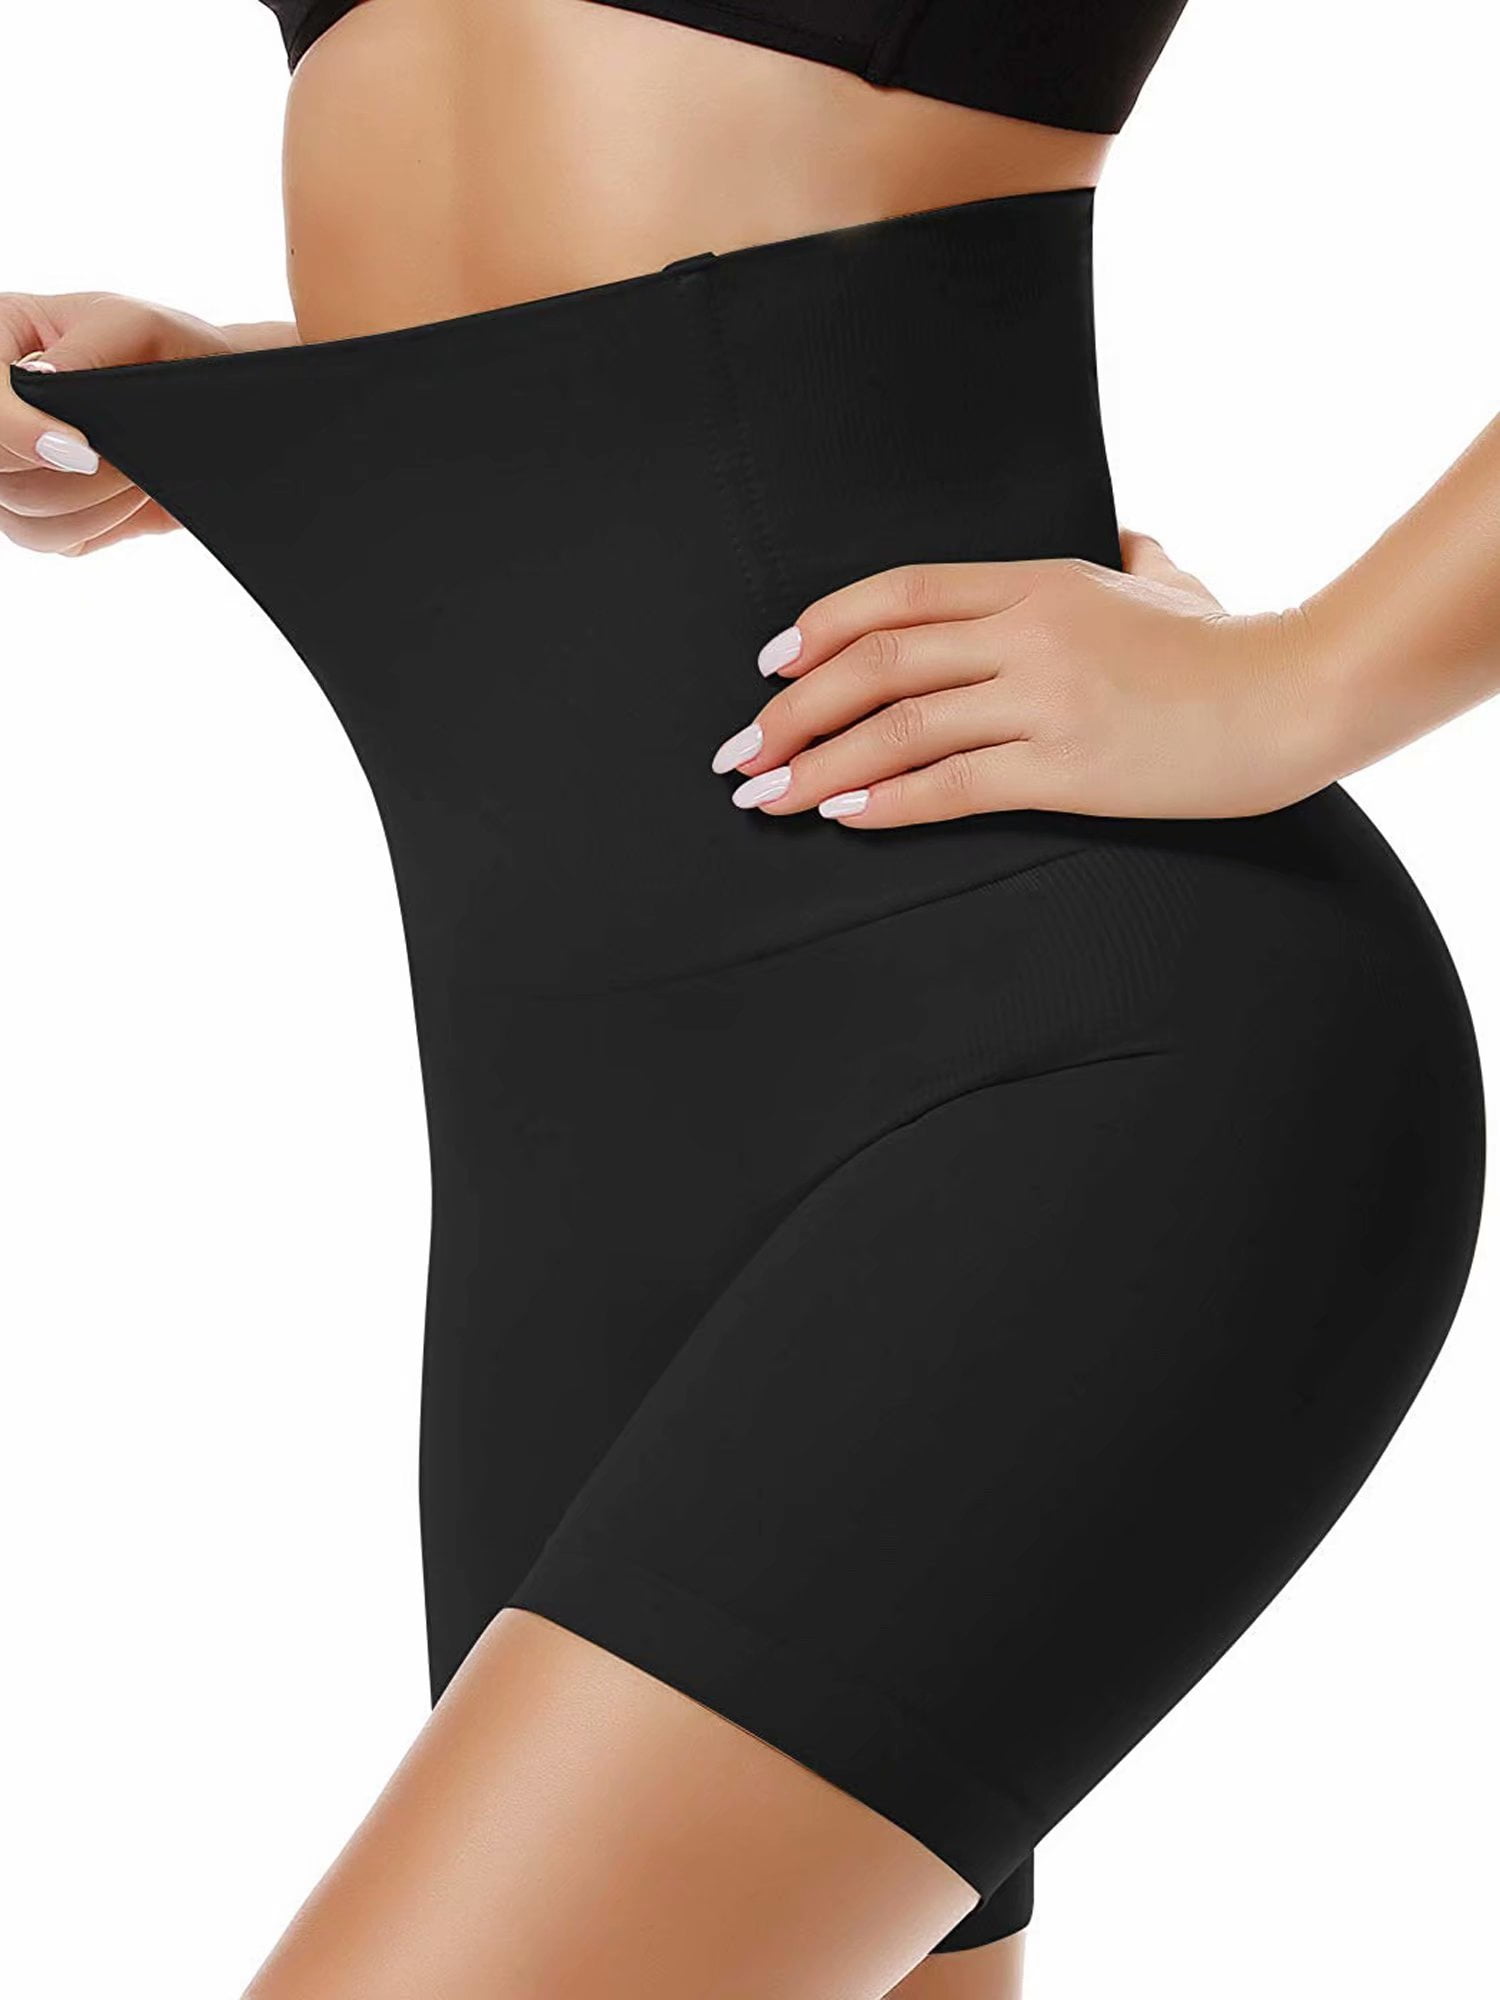 Ladies Body Shaping Sculpting Slimming Underwear Magic Pants Shorts Firm Control 